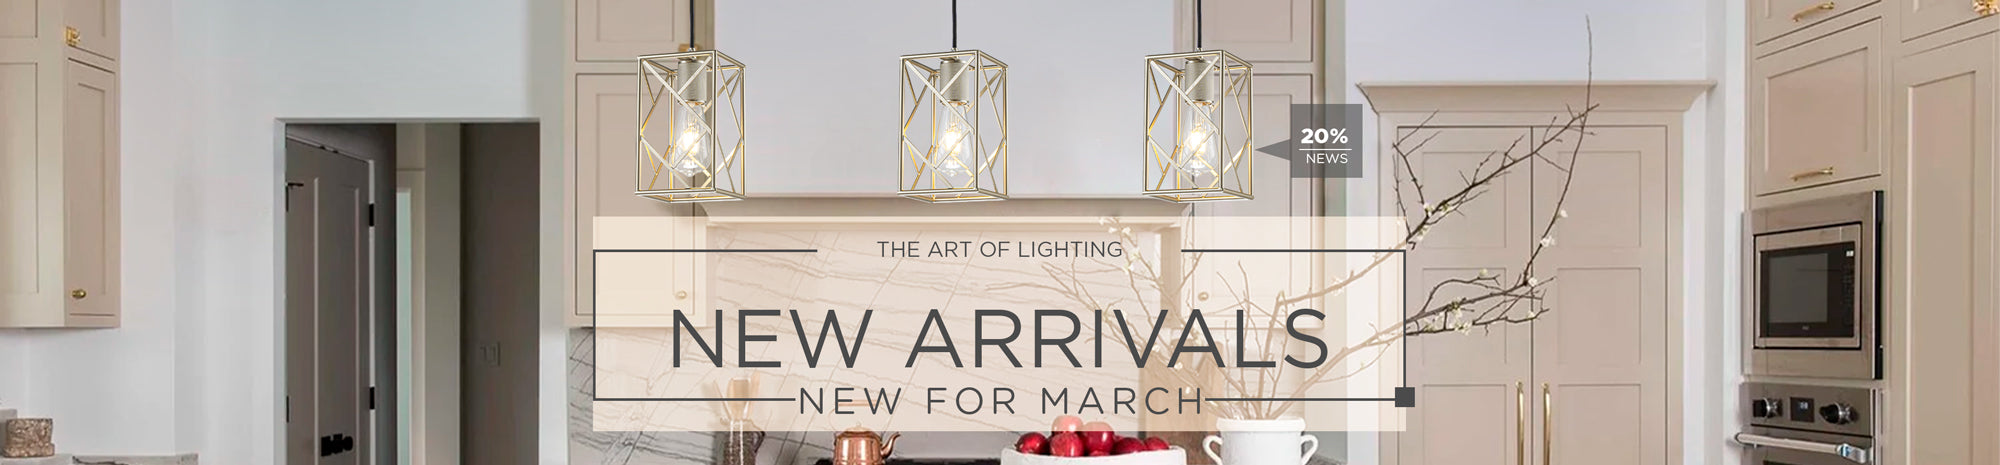 MARCH NEW ARRIVALS